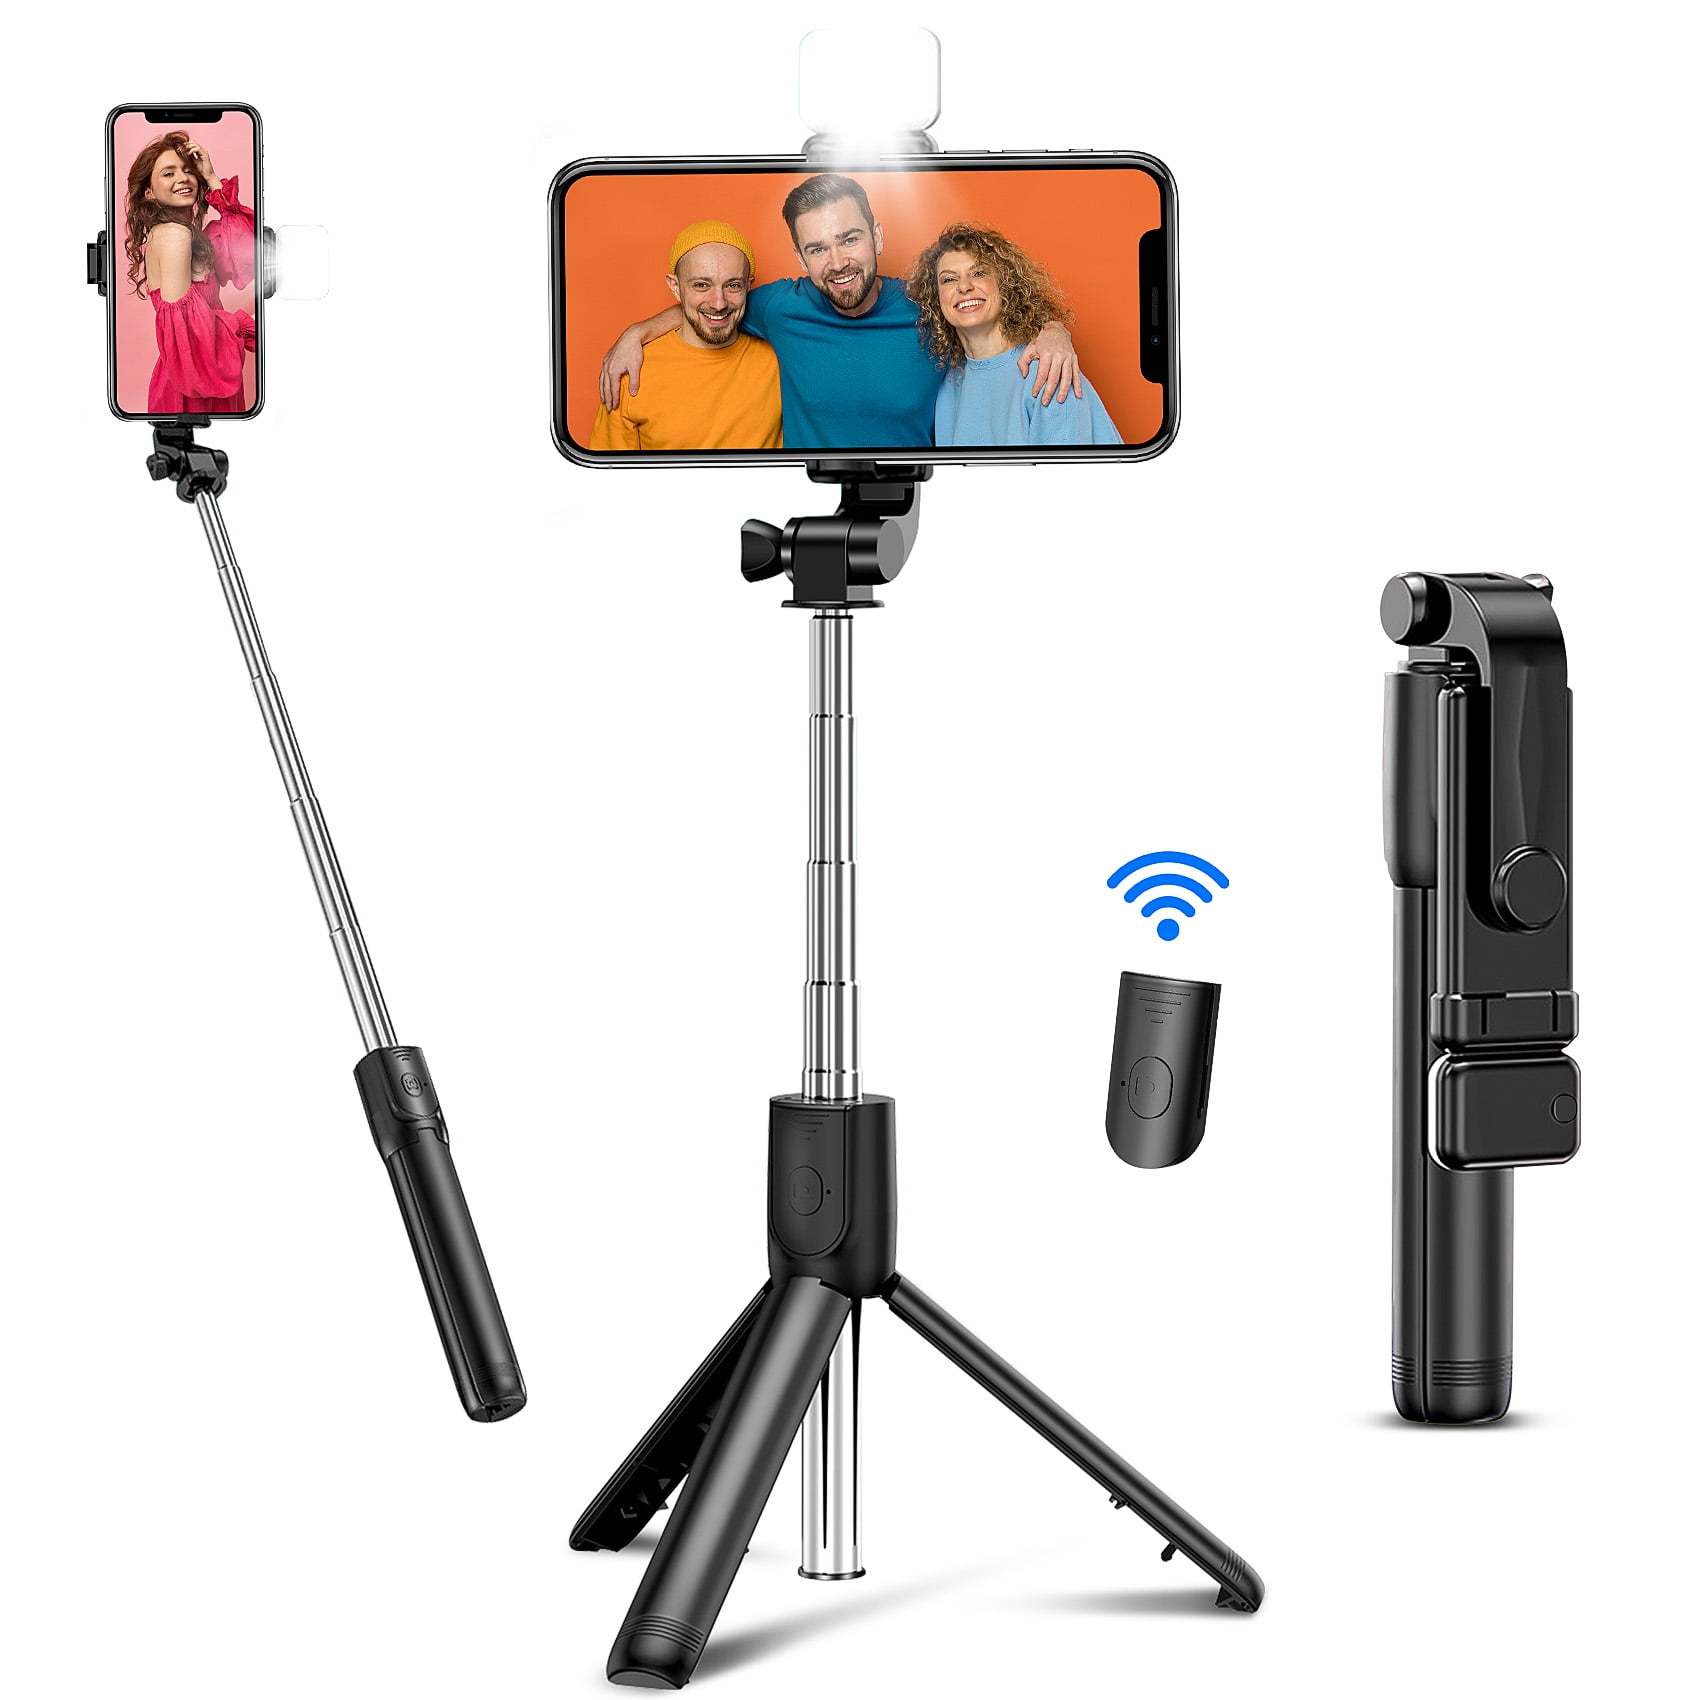 More Selfie Stick Tripod Galaxy S10/S9/S9 Plus CAFELE All in One Extendable Tripod Stand with Detachable Bluetooth Remote,Lightweight Aluminum Tripod for iPhone 11/XS MAX/X/8/8 Plus 